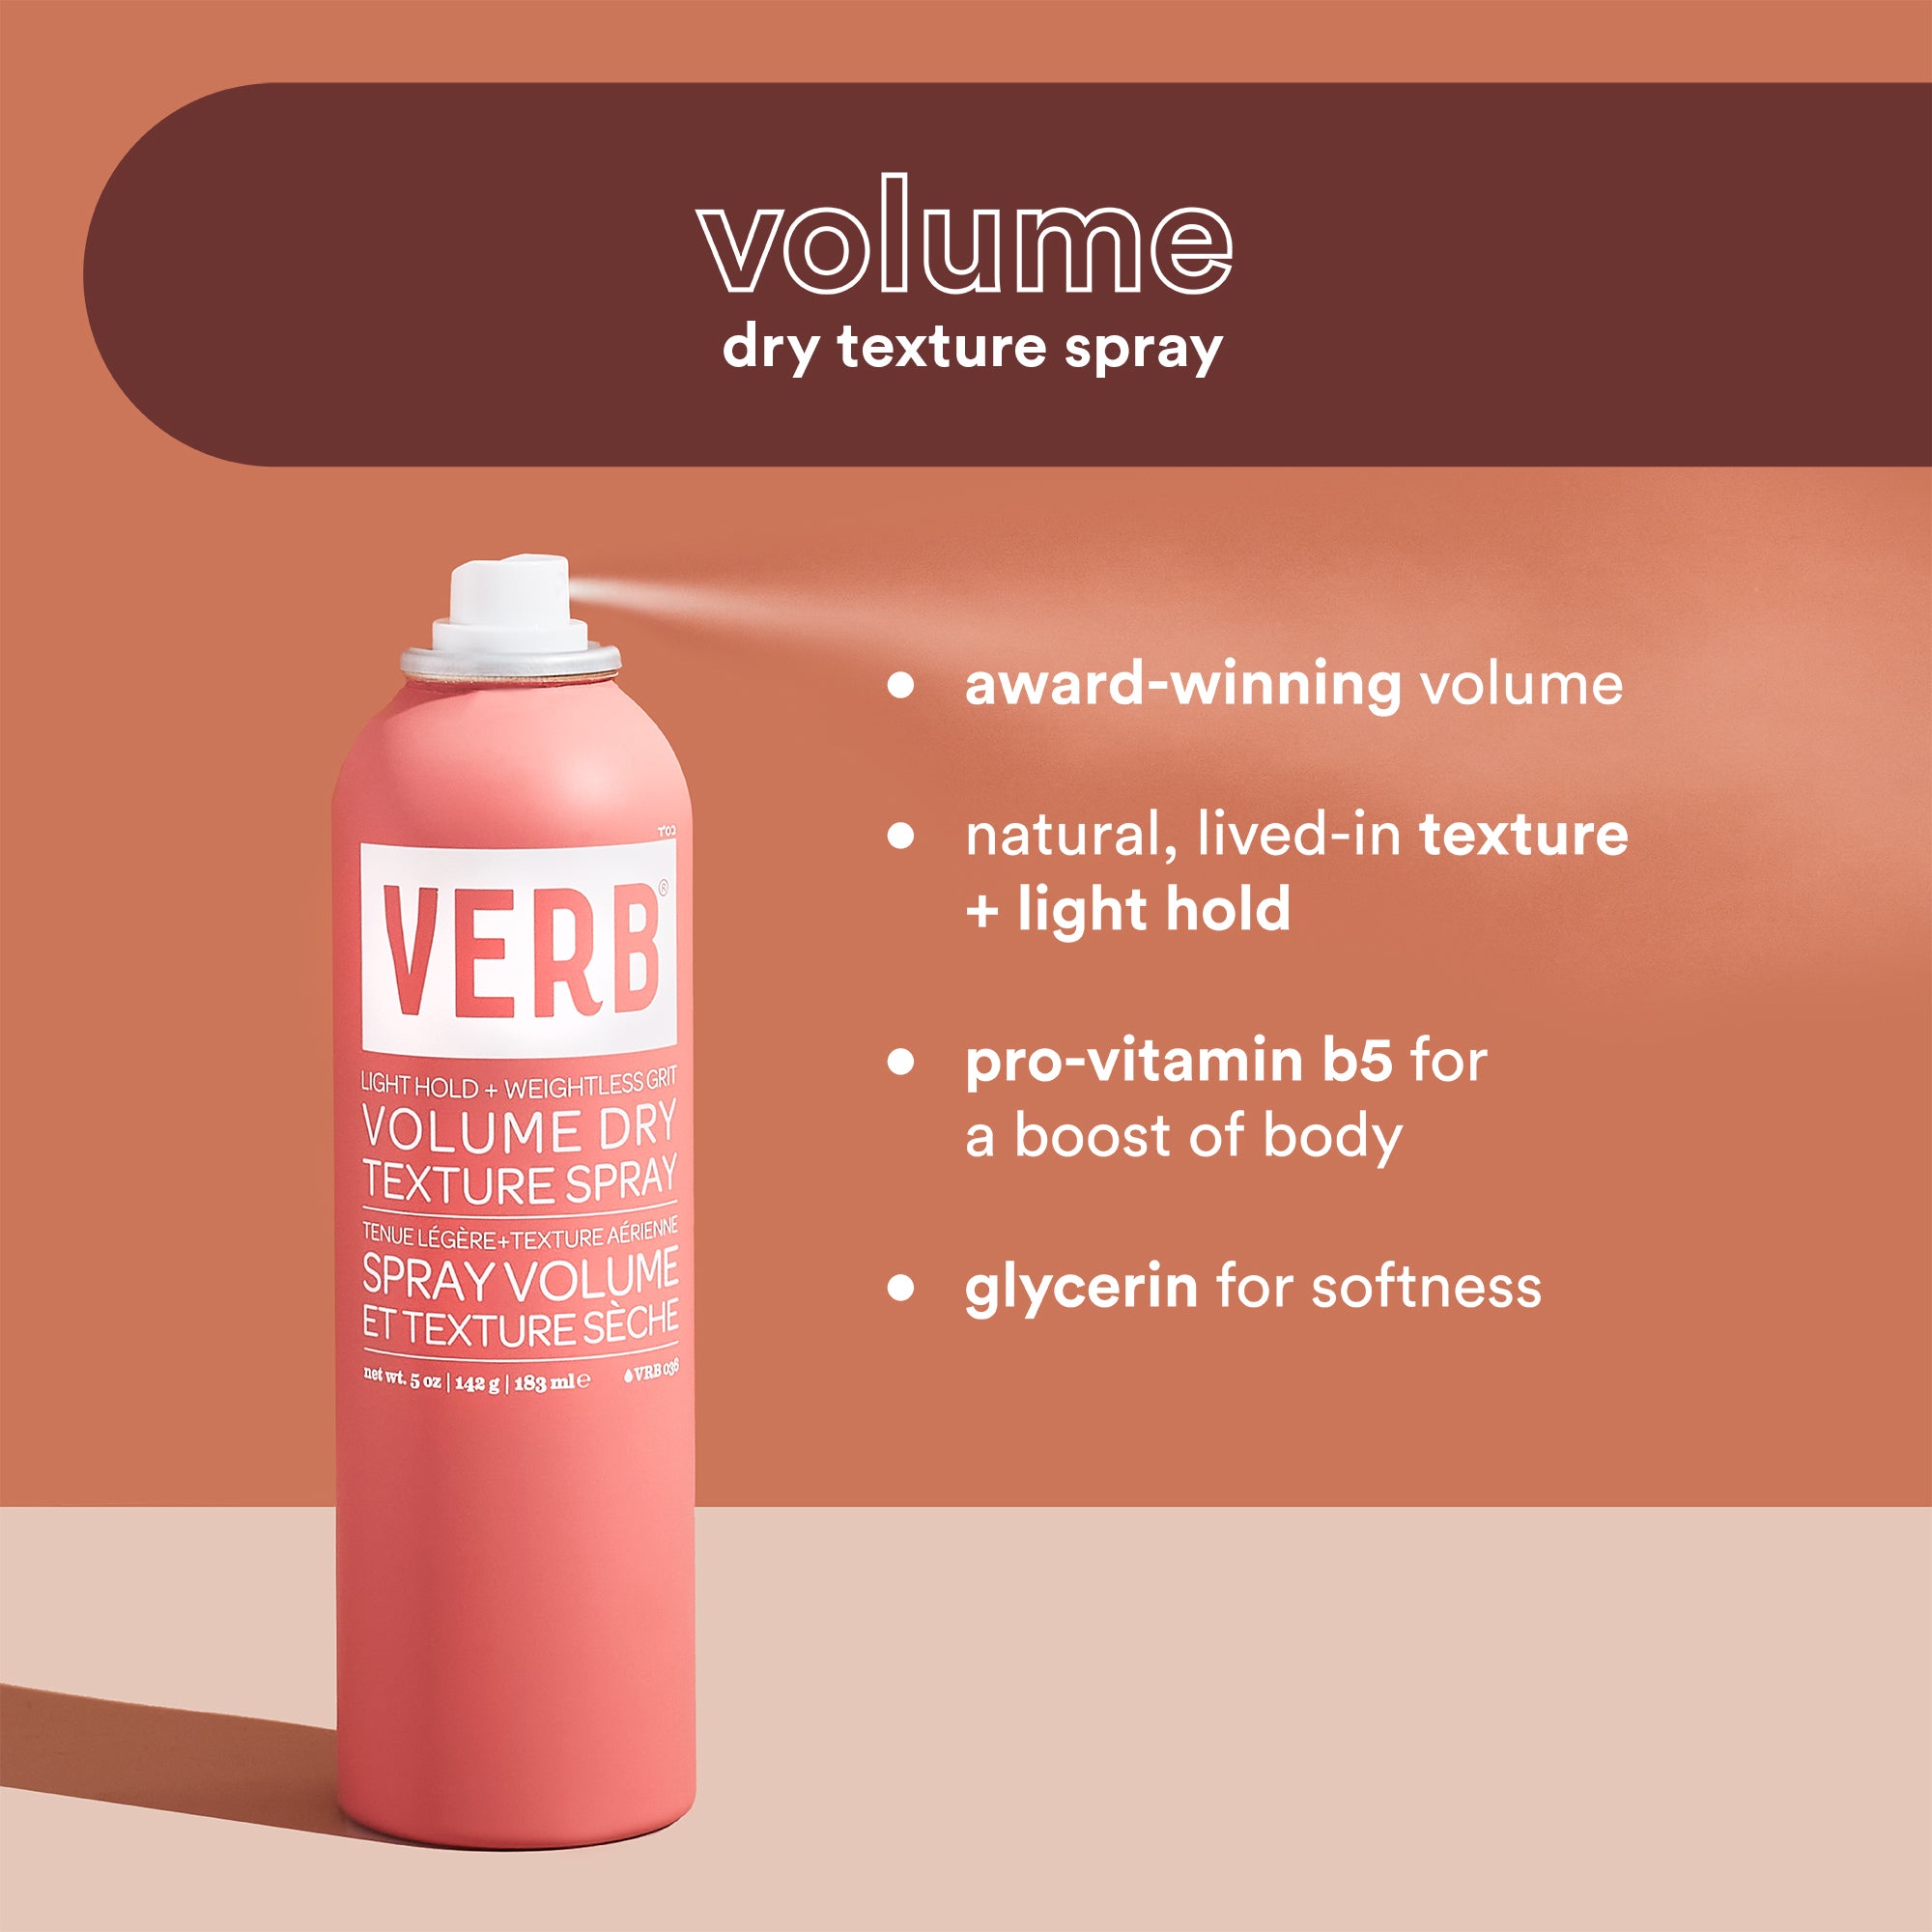 Up the Volume Dry Texture Finishing Spray